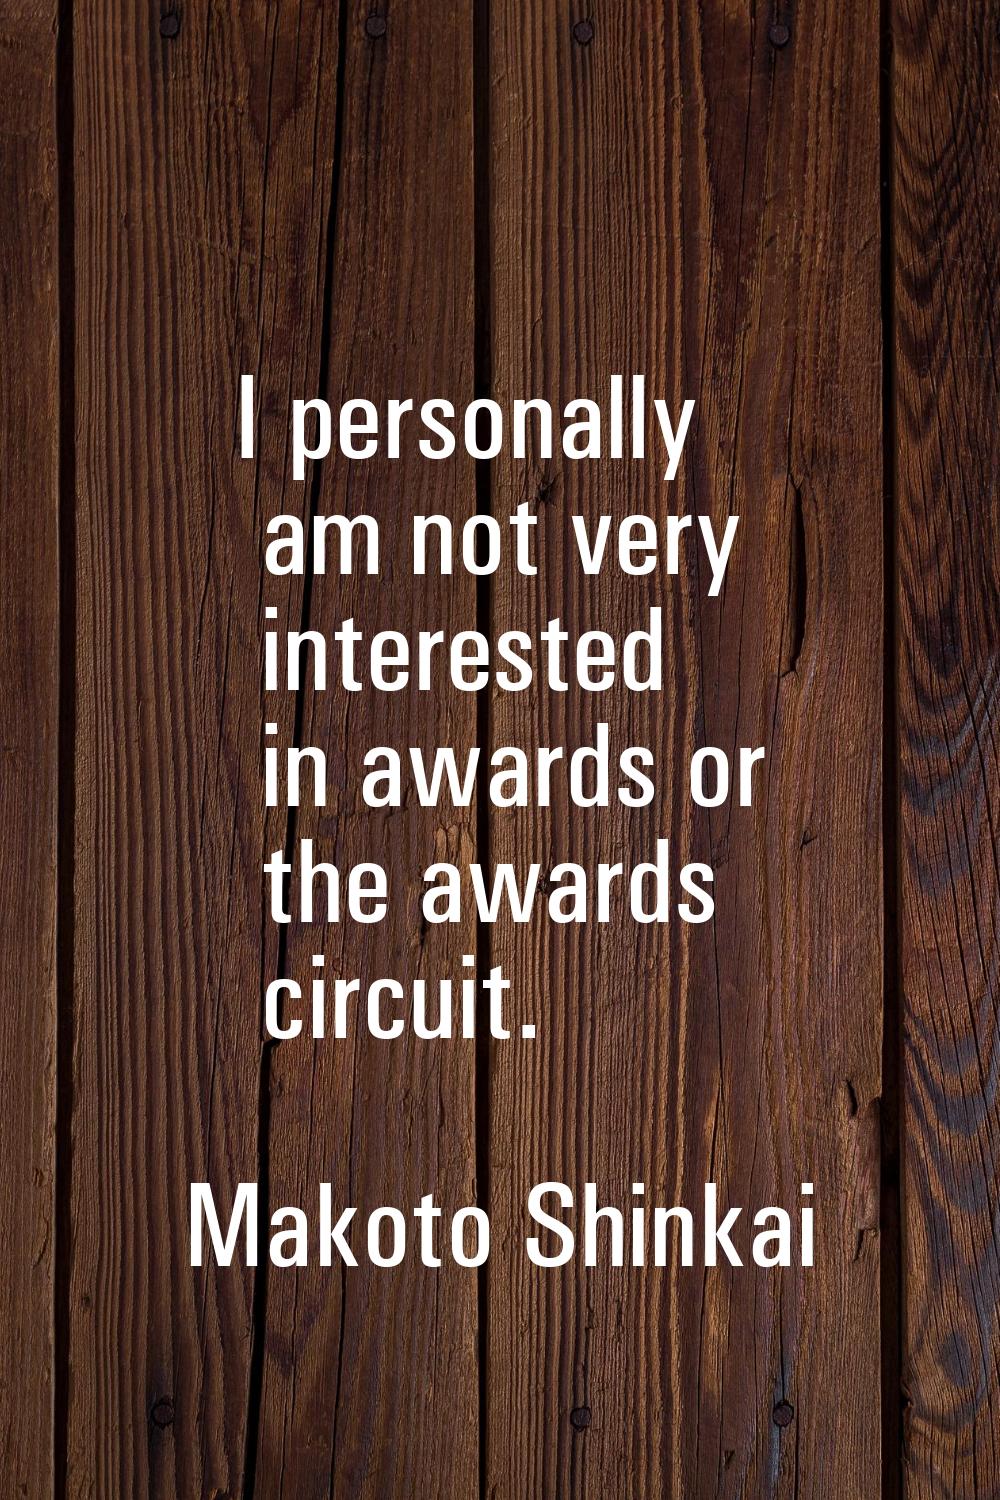 I personally am not very interested in awards or the awards circuit.